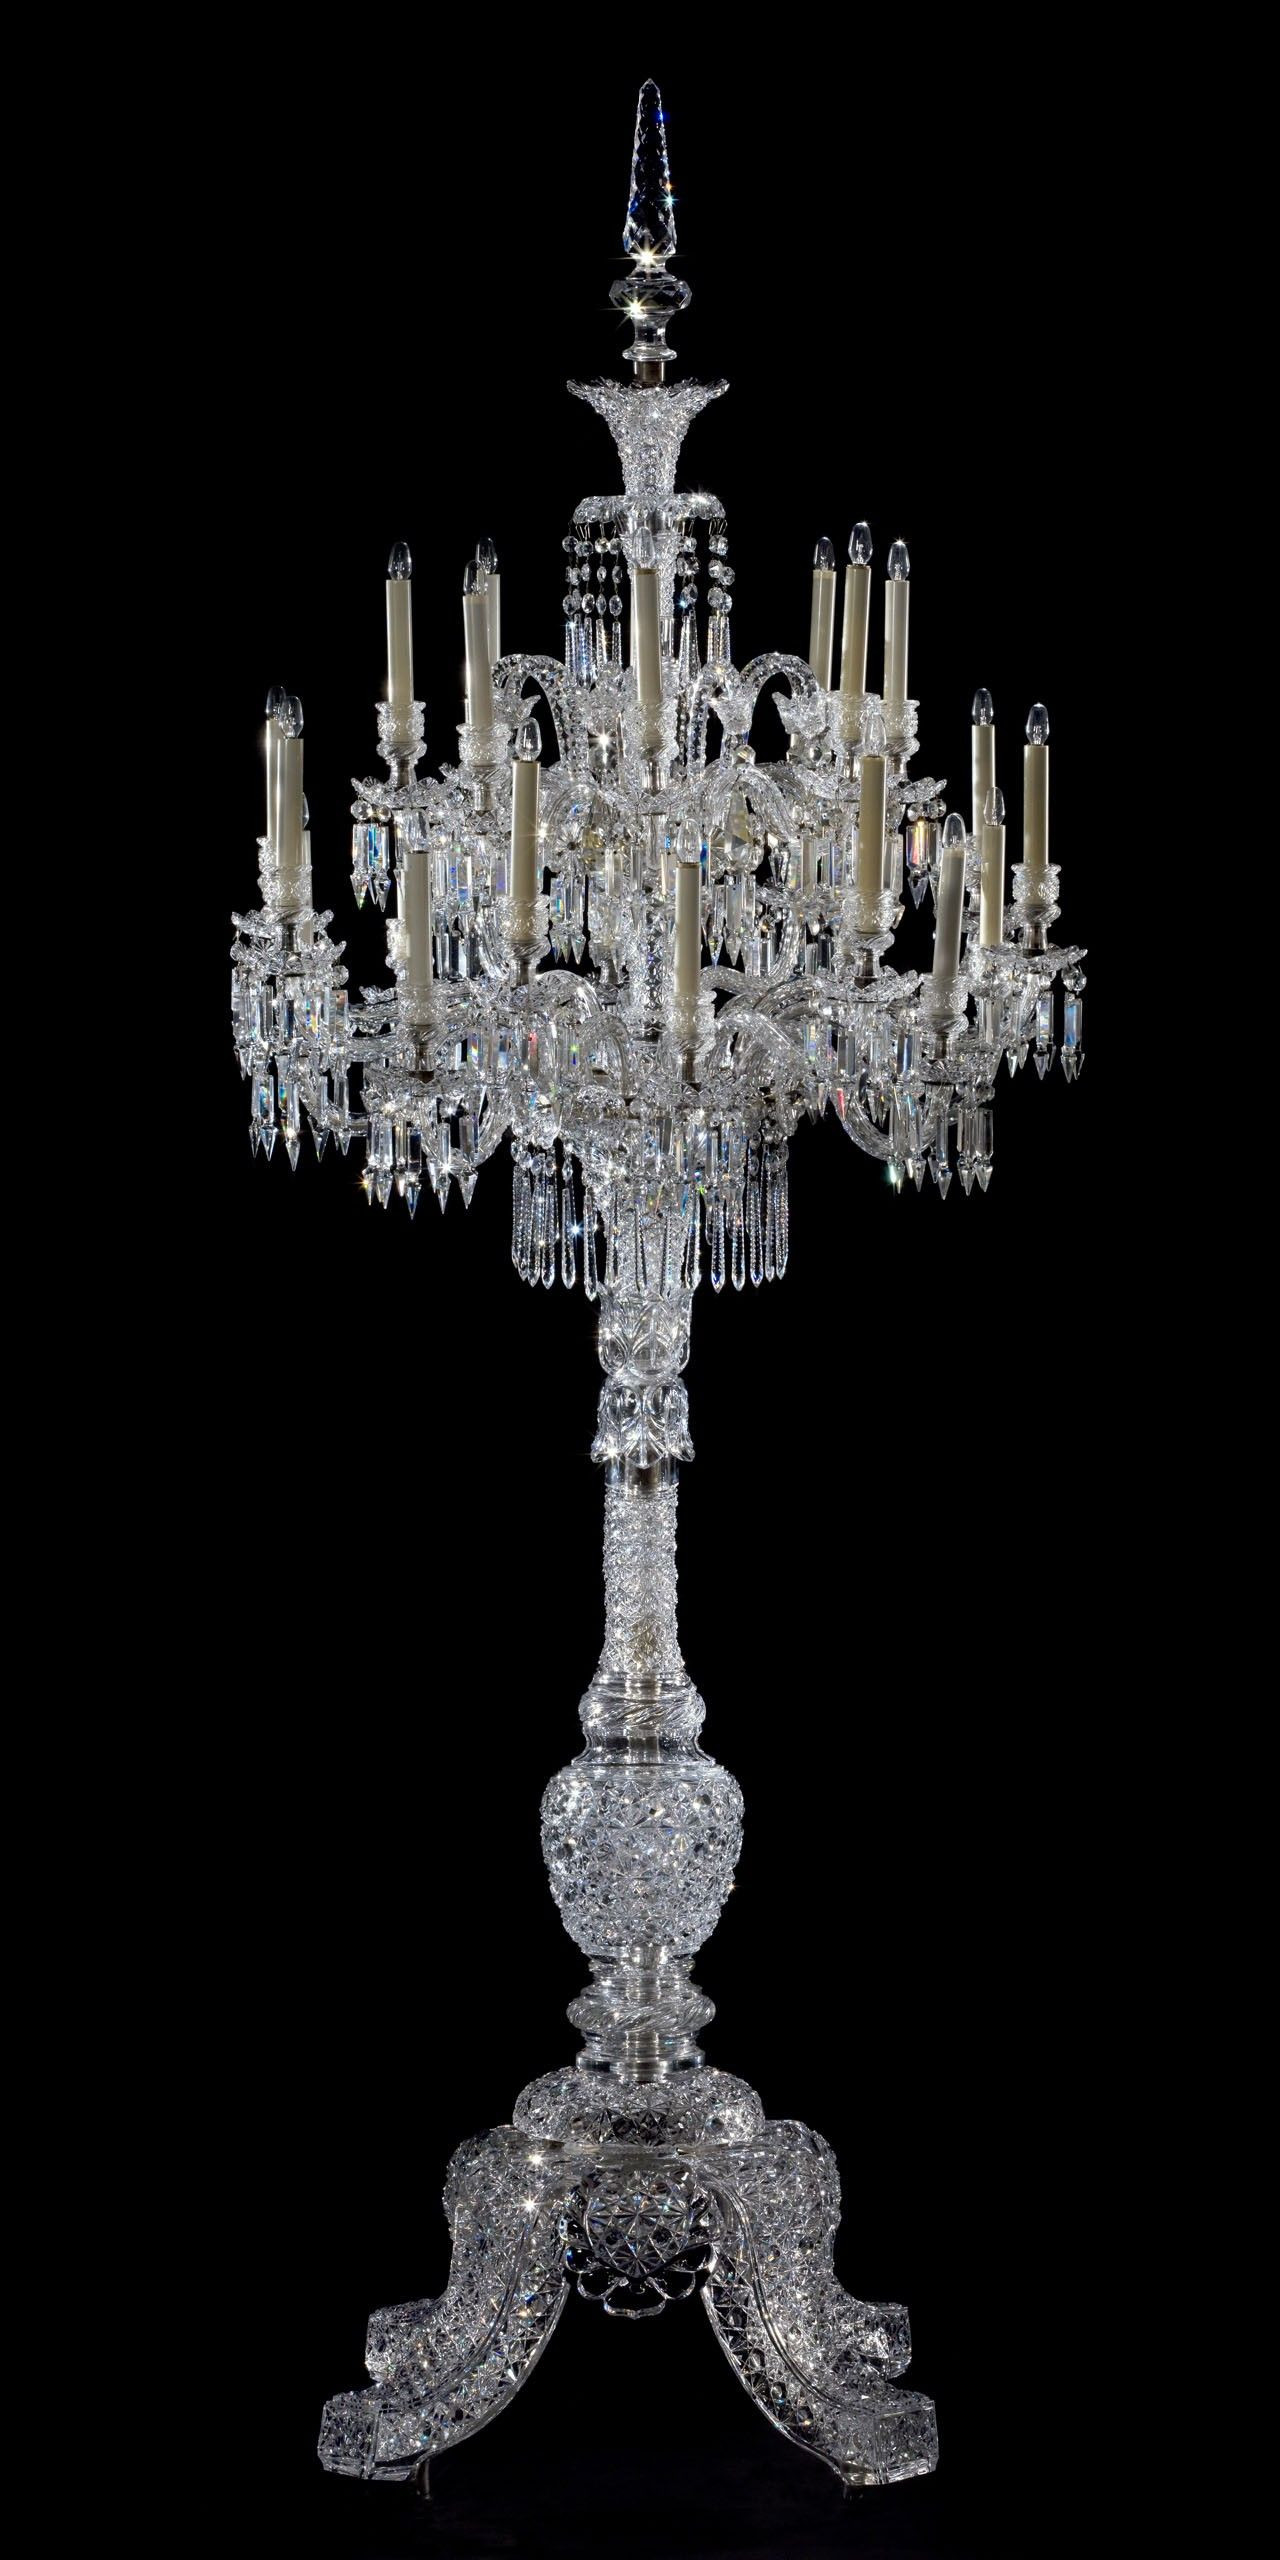 12 Fashionable Baccarat Gingko Crystal Vase 2024 free download baccarat gingko crystal vase of pin by rad deo on house pinterest chandelier lighting and antiques throughout www chrysler org images collections baccarat candelabrum antique chandelier anti